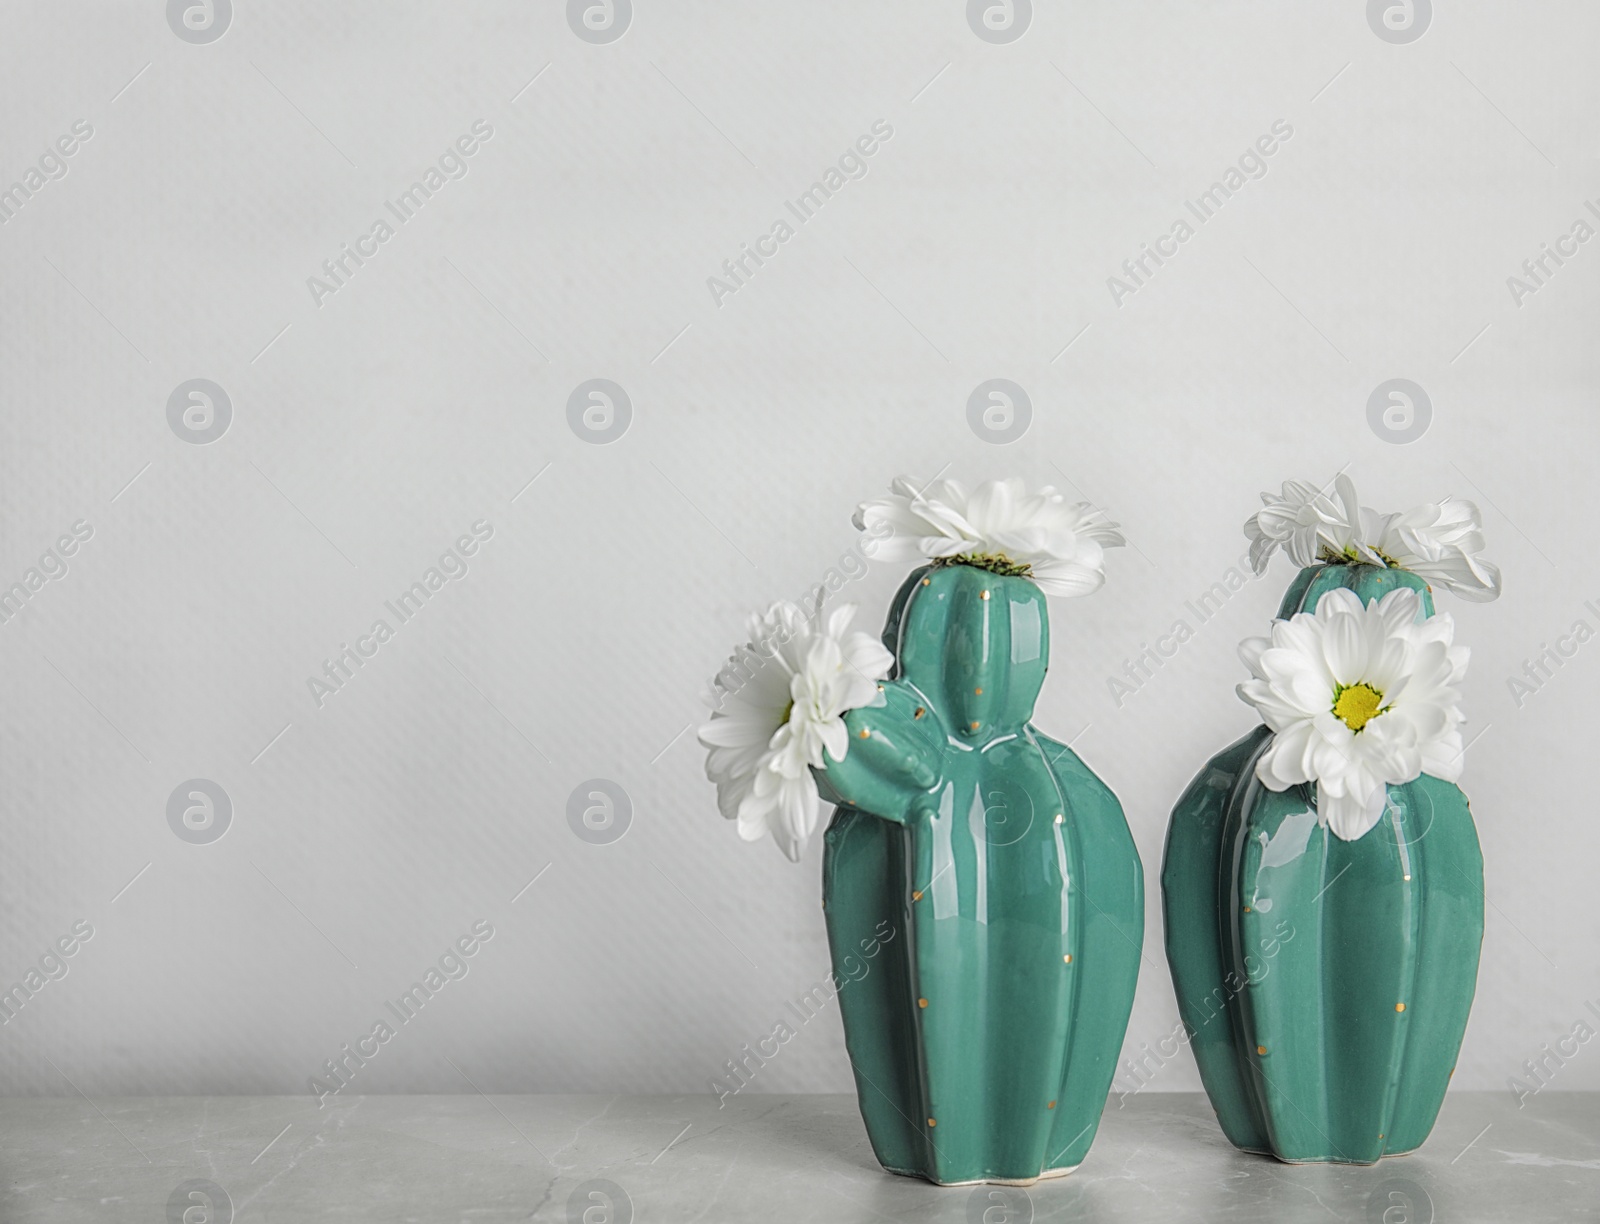 Photo of Trendy cactus shaped vases with flowers on table against light wall. Creative decor